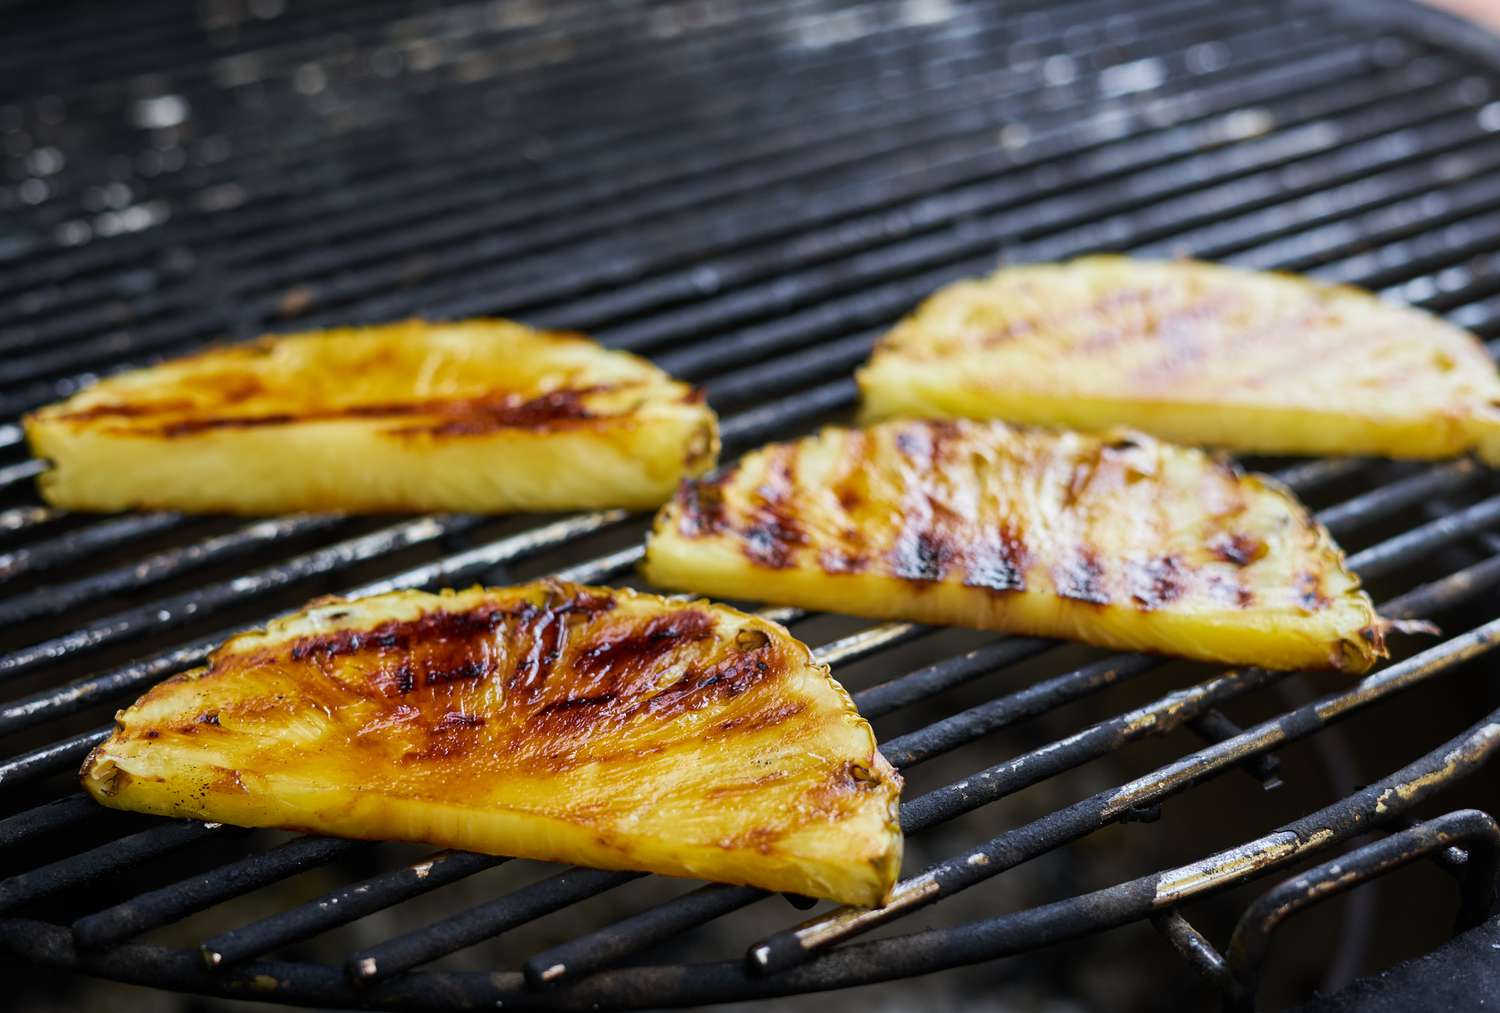 Slices of honey-brushed pineapple on a grill